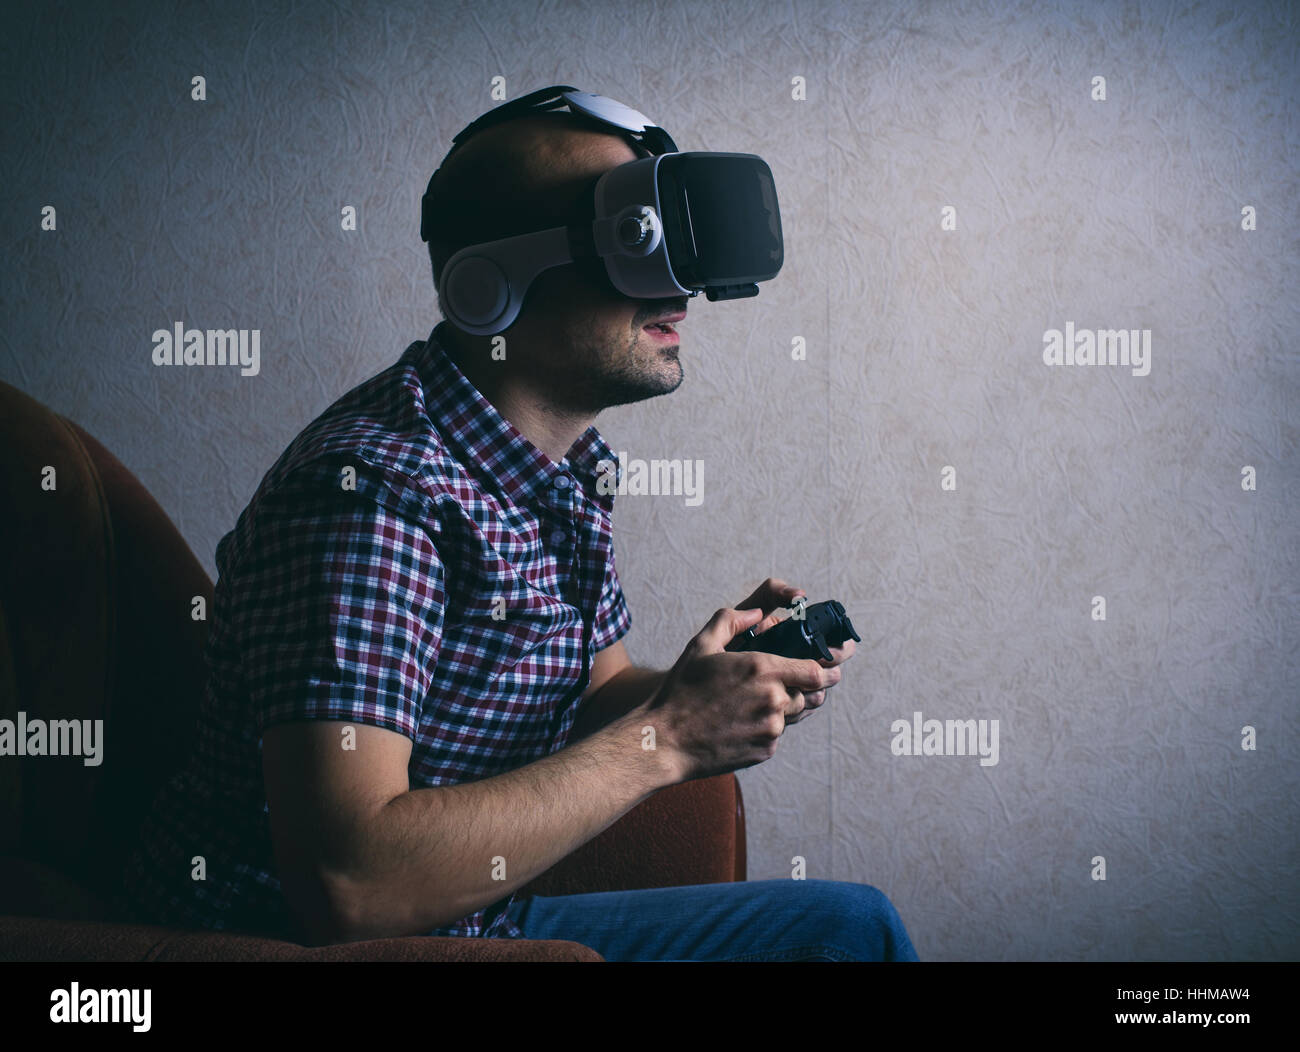 man playing computer game at home in virtual glasses Stock Photo